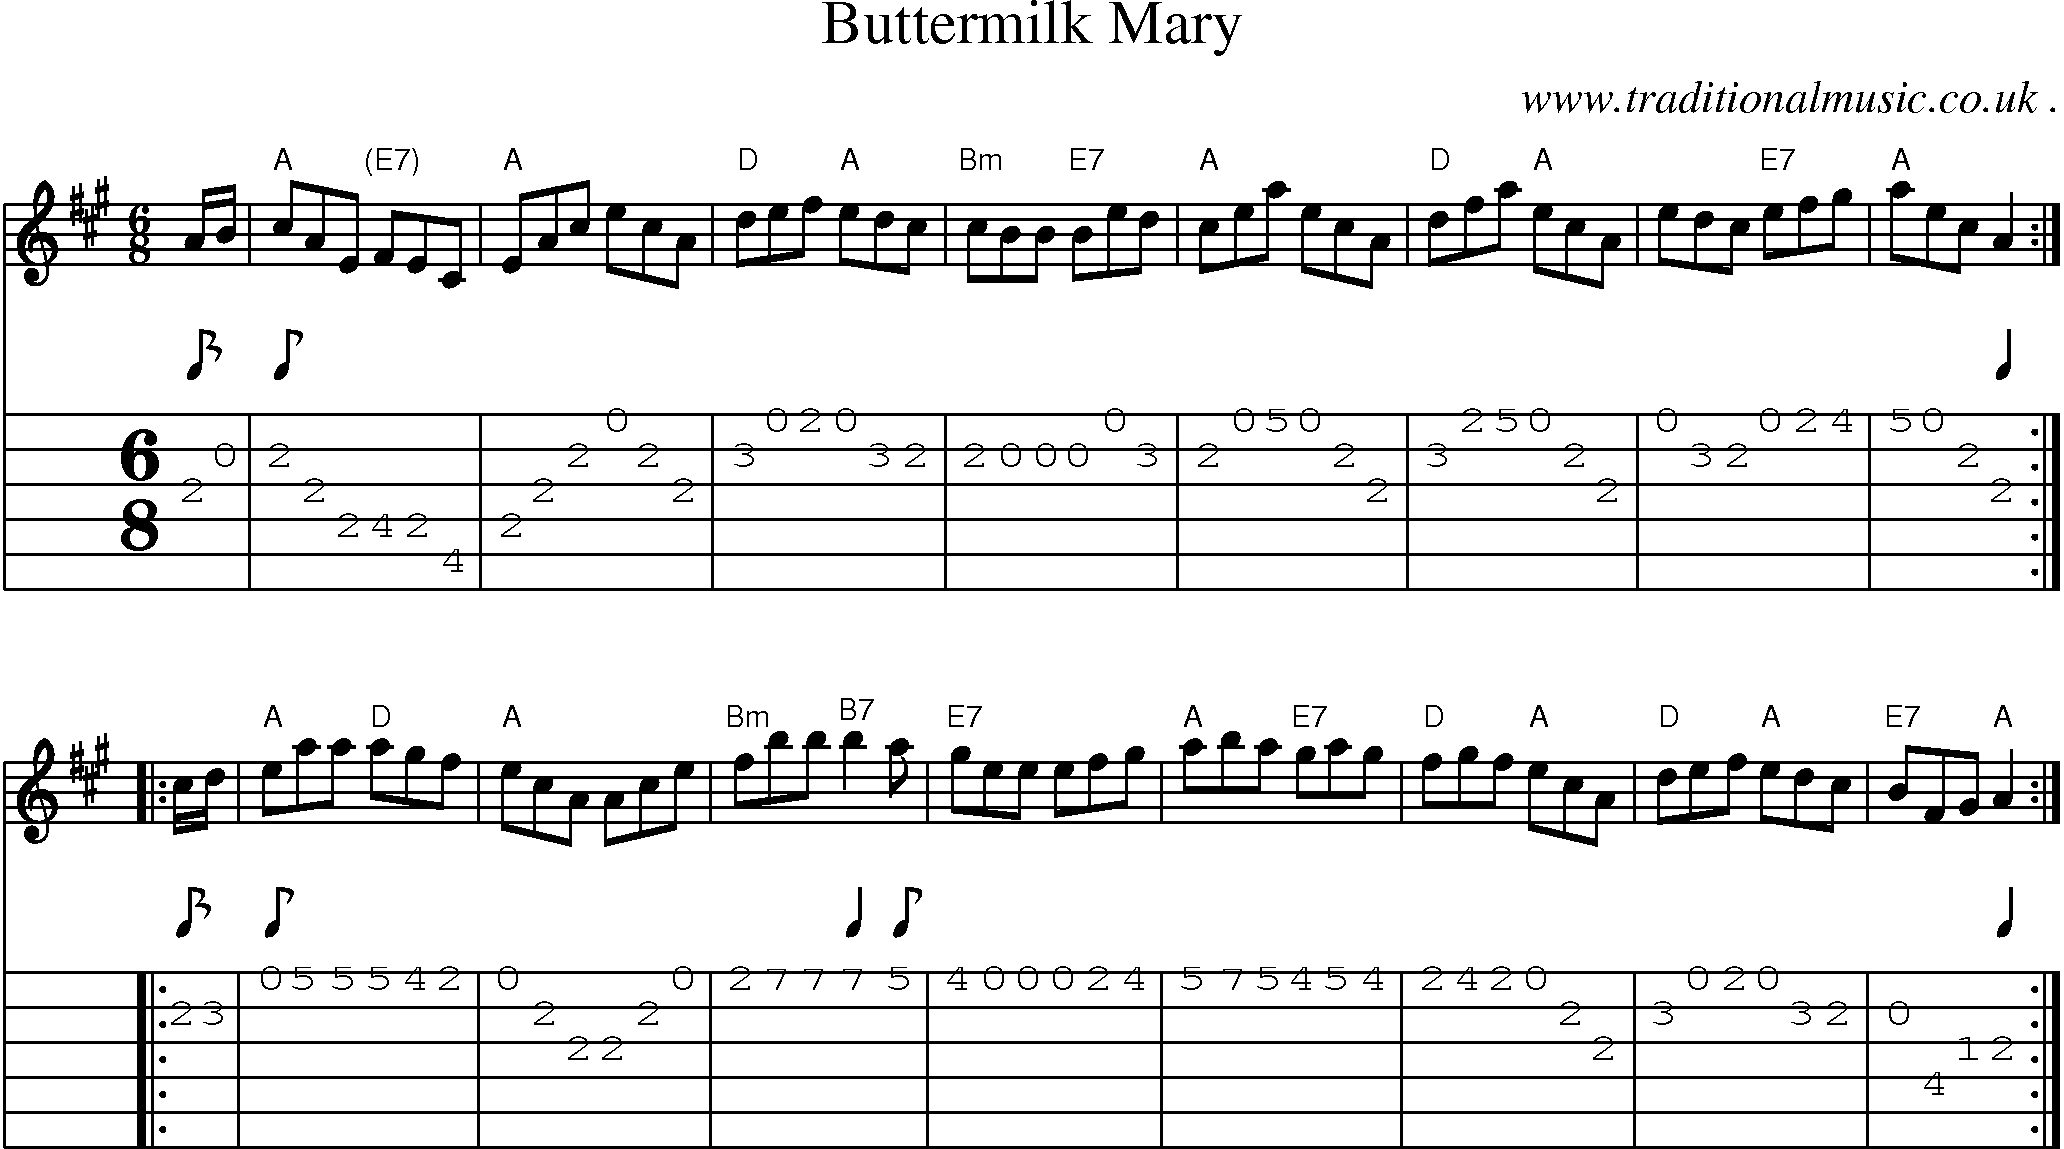 Sheet-music  score, Chords and Guitar Tabs for Buttermilk Mary